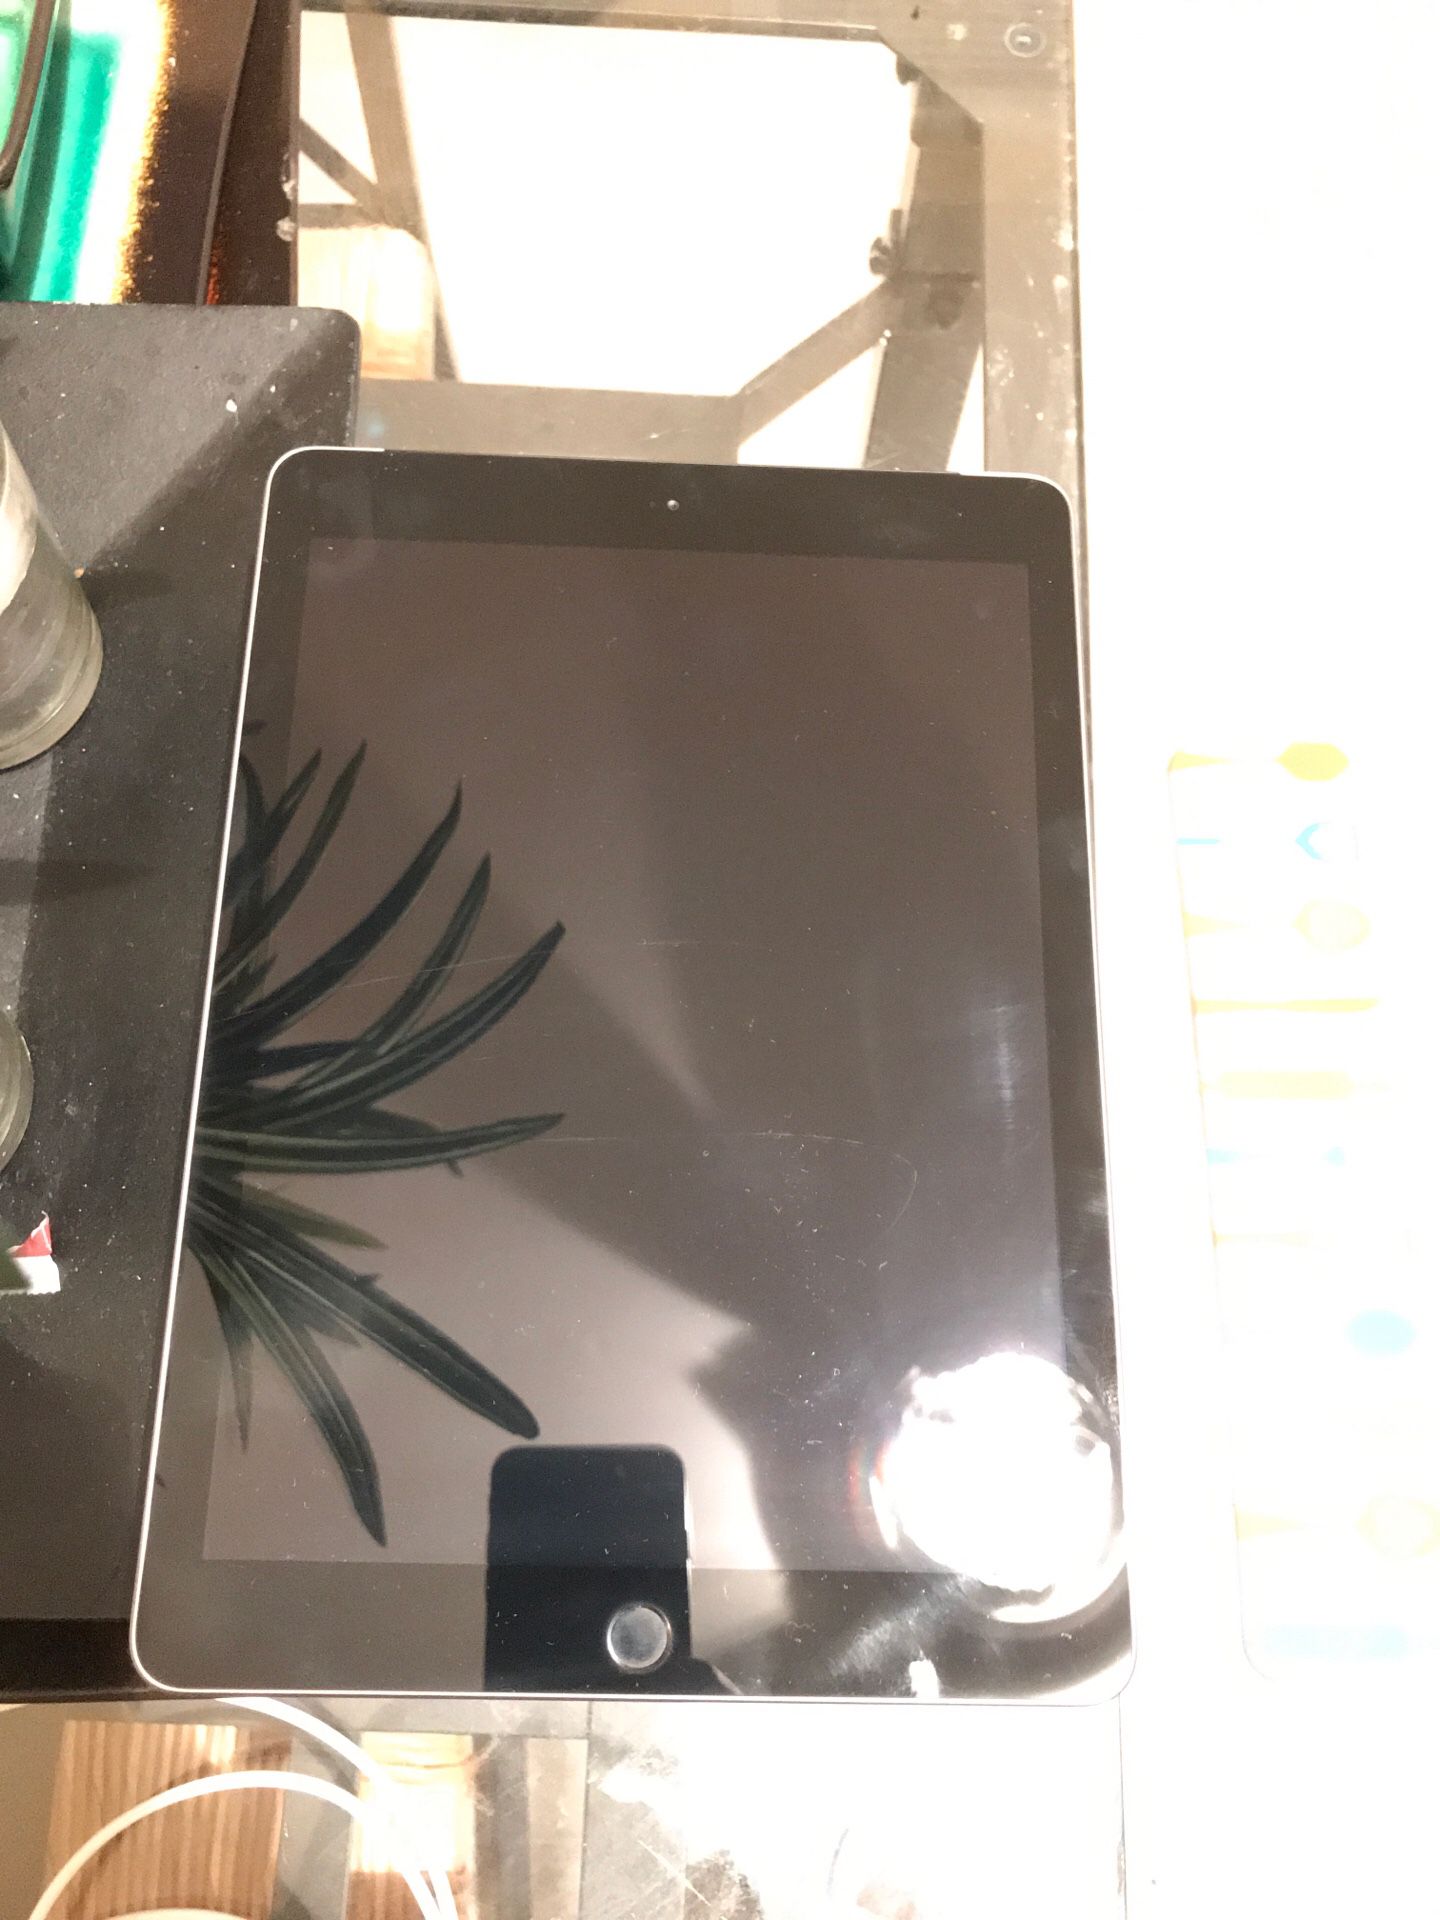 IPAD 6 Serious brand new for sale.200$ unlocked